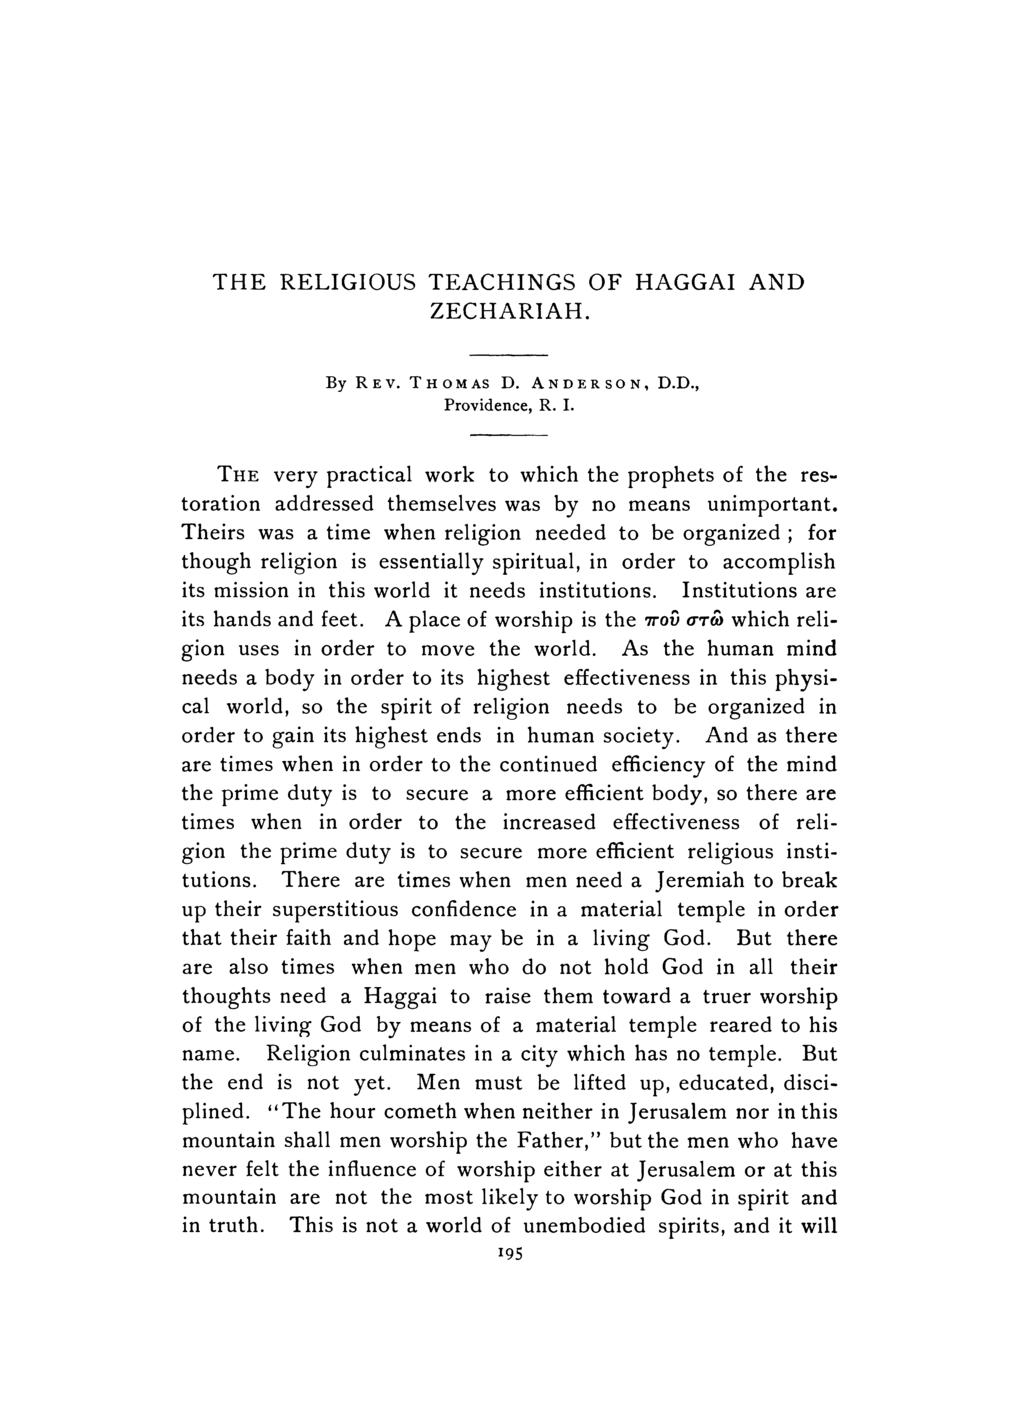 THE RELIGIOUS TEACHINGS OF HAGGAI AND ZECHARIAH. By REV. THOMAS D. ANDERSON, Providence, R. I. D.D., THE very practical work to which the prophets of the restoration addressed themselves was by no means unimportant.